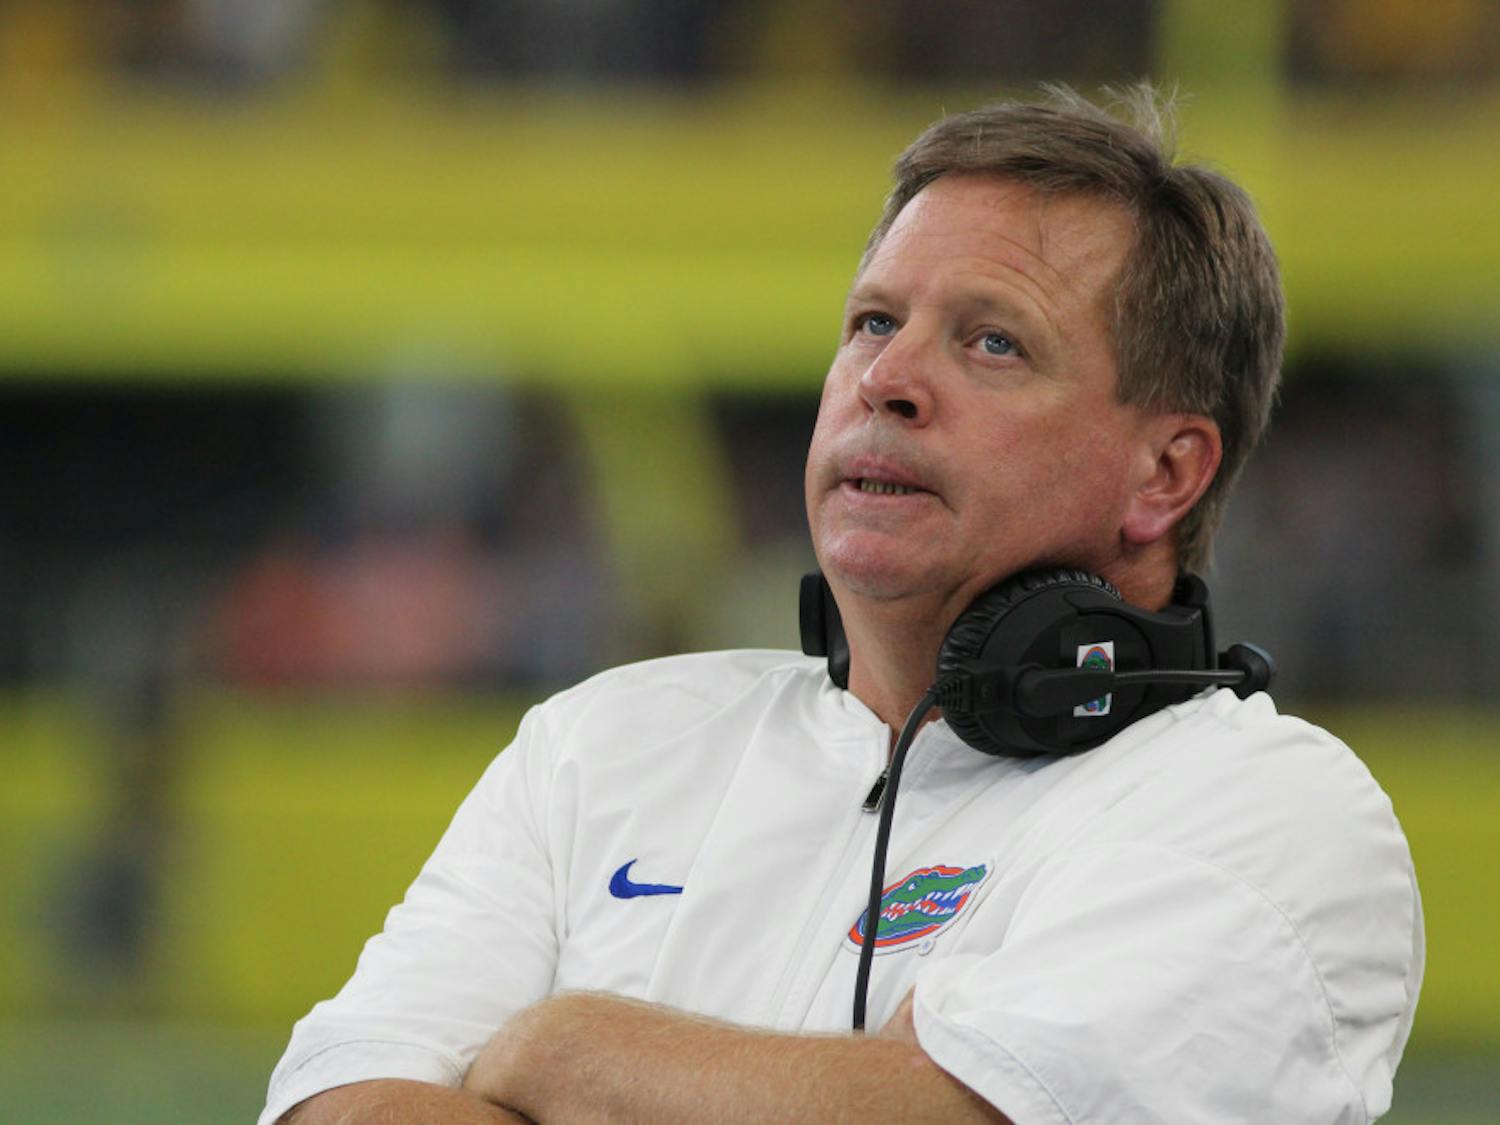 Shortly after the news conference ended, the University Athletic Association then stepped into the fray, releasing a statement that didn’t exactly stand behind the leader of its football program. “The University Athletic Association takes the safety of our student-athletes, coaches, staff and families very seriously. Our administration met with Coach McElwain this afternoon and he offered no additional details.”